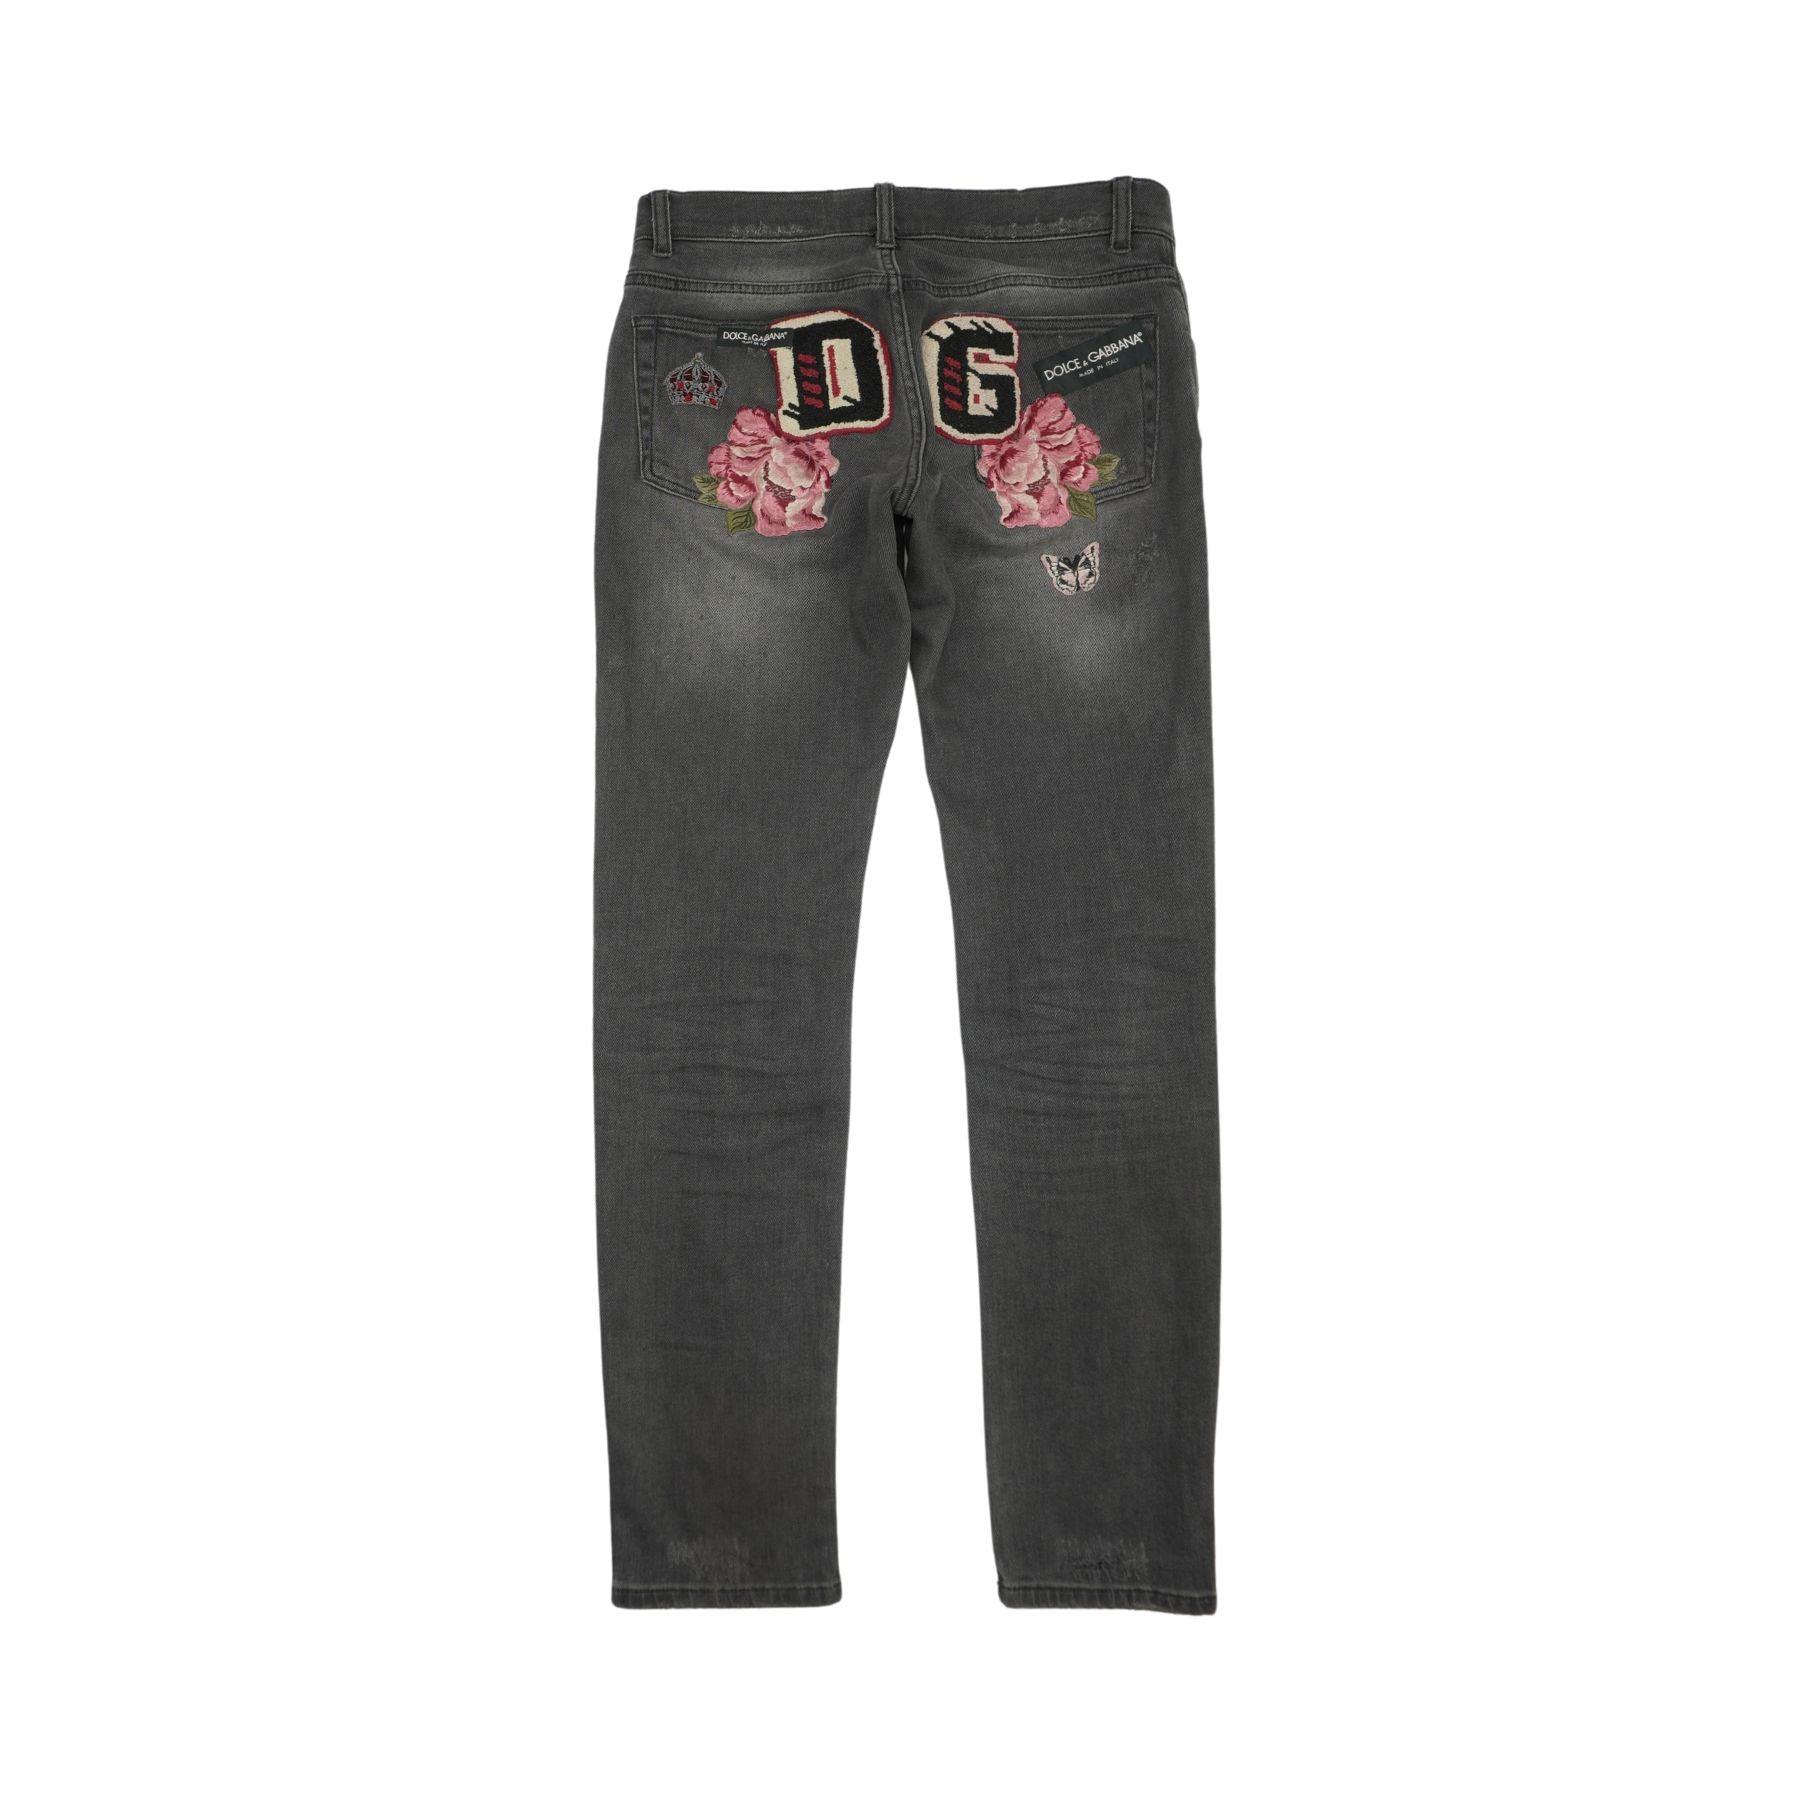 Dolce & Gabbana Jeans - Women's 46 - Fashionably Yours